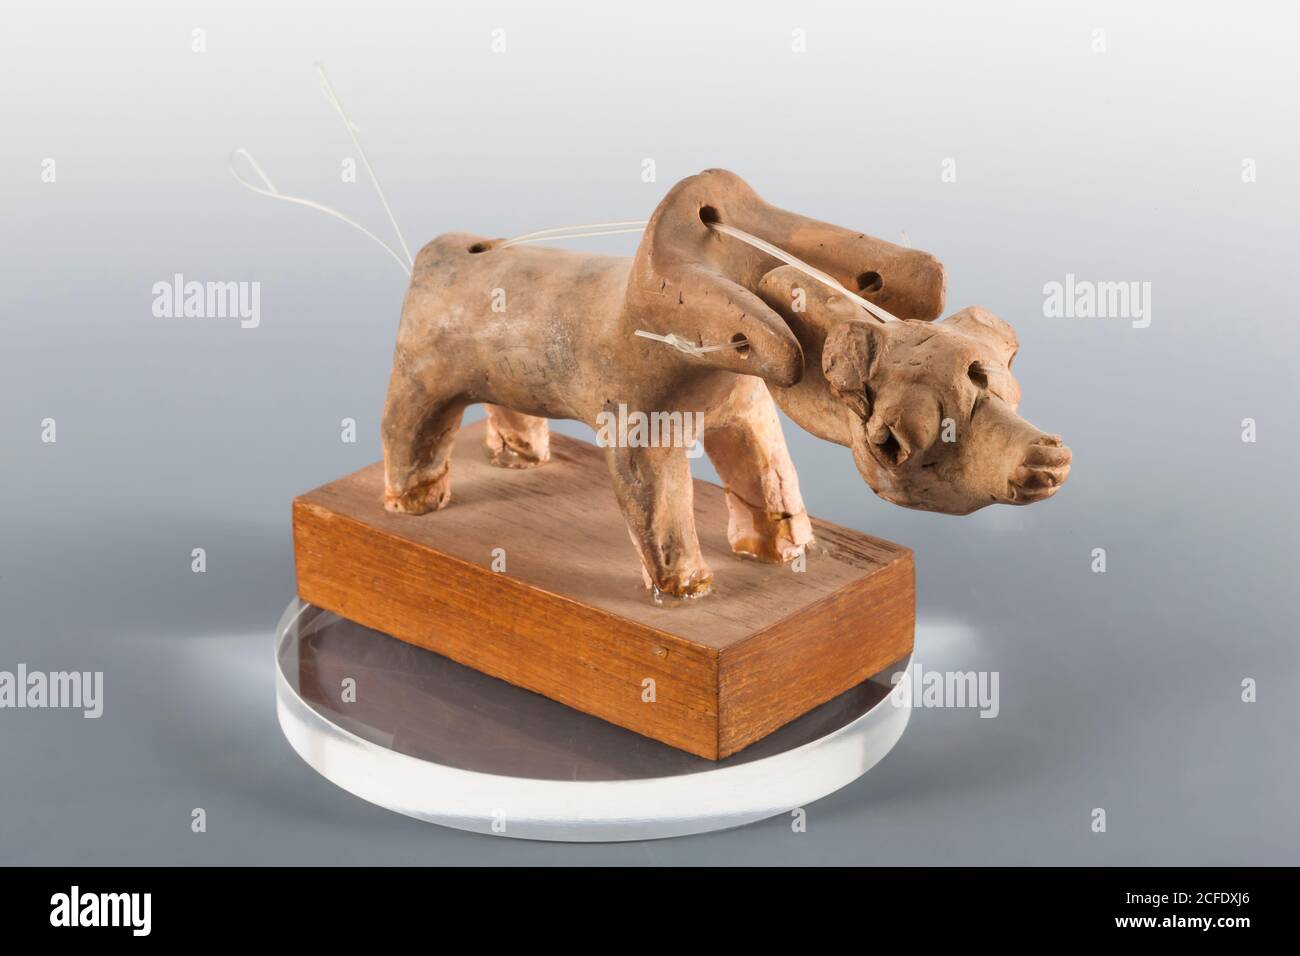 Clay animal with moving head, Mohenjo daro, Indus valley civilization Gallery, National Museum of Pakistan, Karachi, Sindh, Pakistan, South Asia, Asia Stock Photo